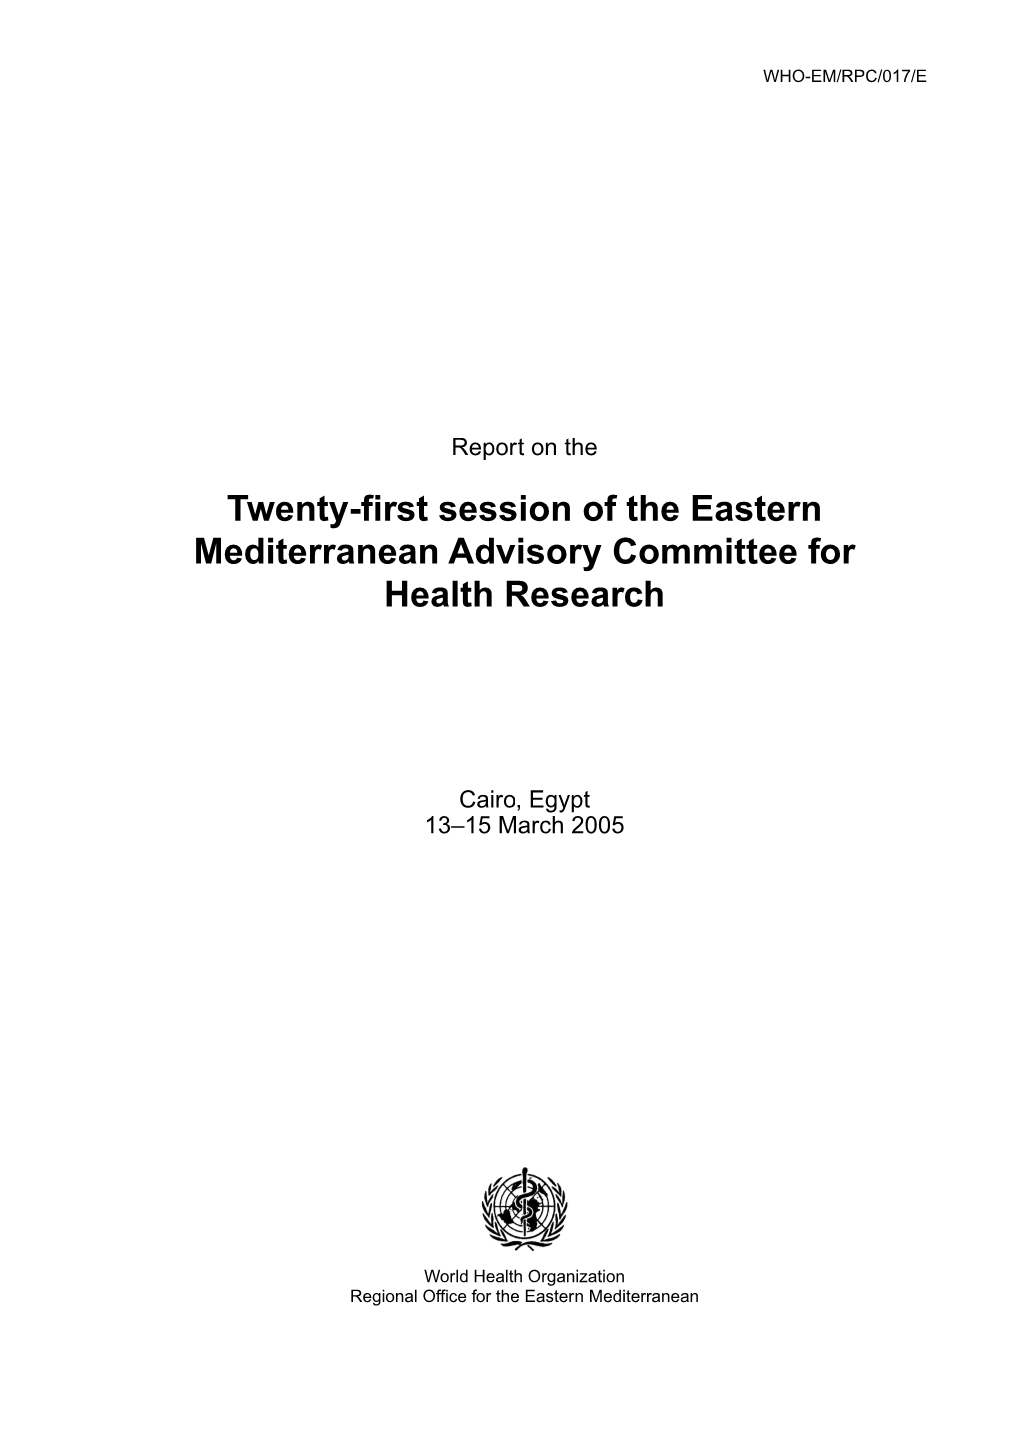 Twenty-First Session of the Eastern Mediterranean Advisory Committee for Health Research